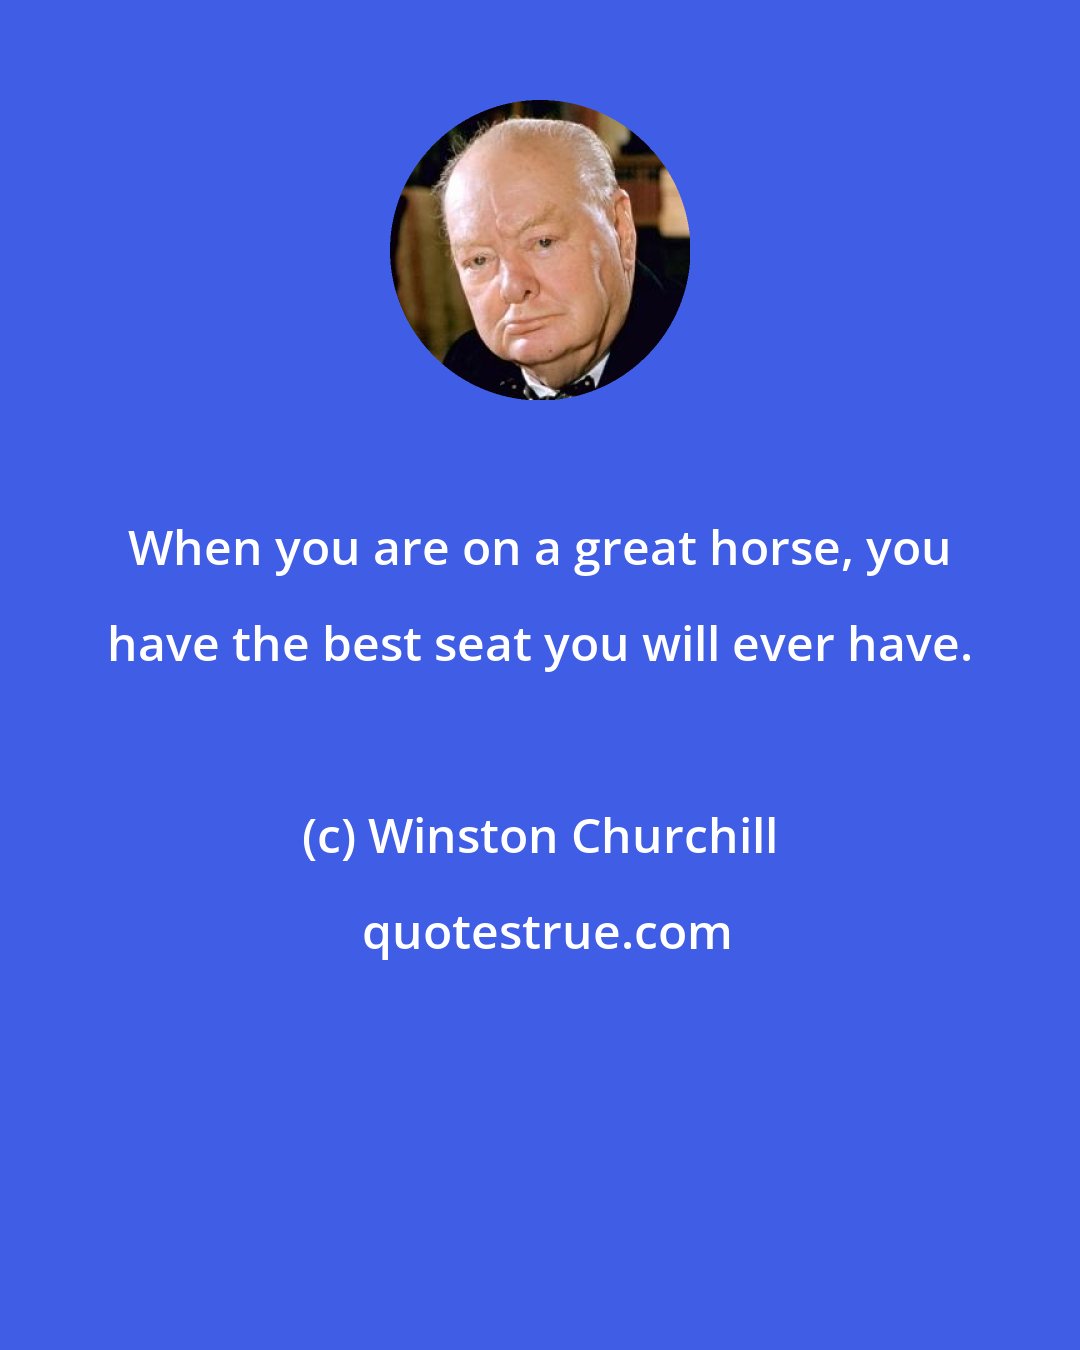 Winston Churchill: When you are on a great horse, you have the best seat you will ever have.